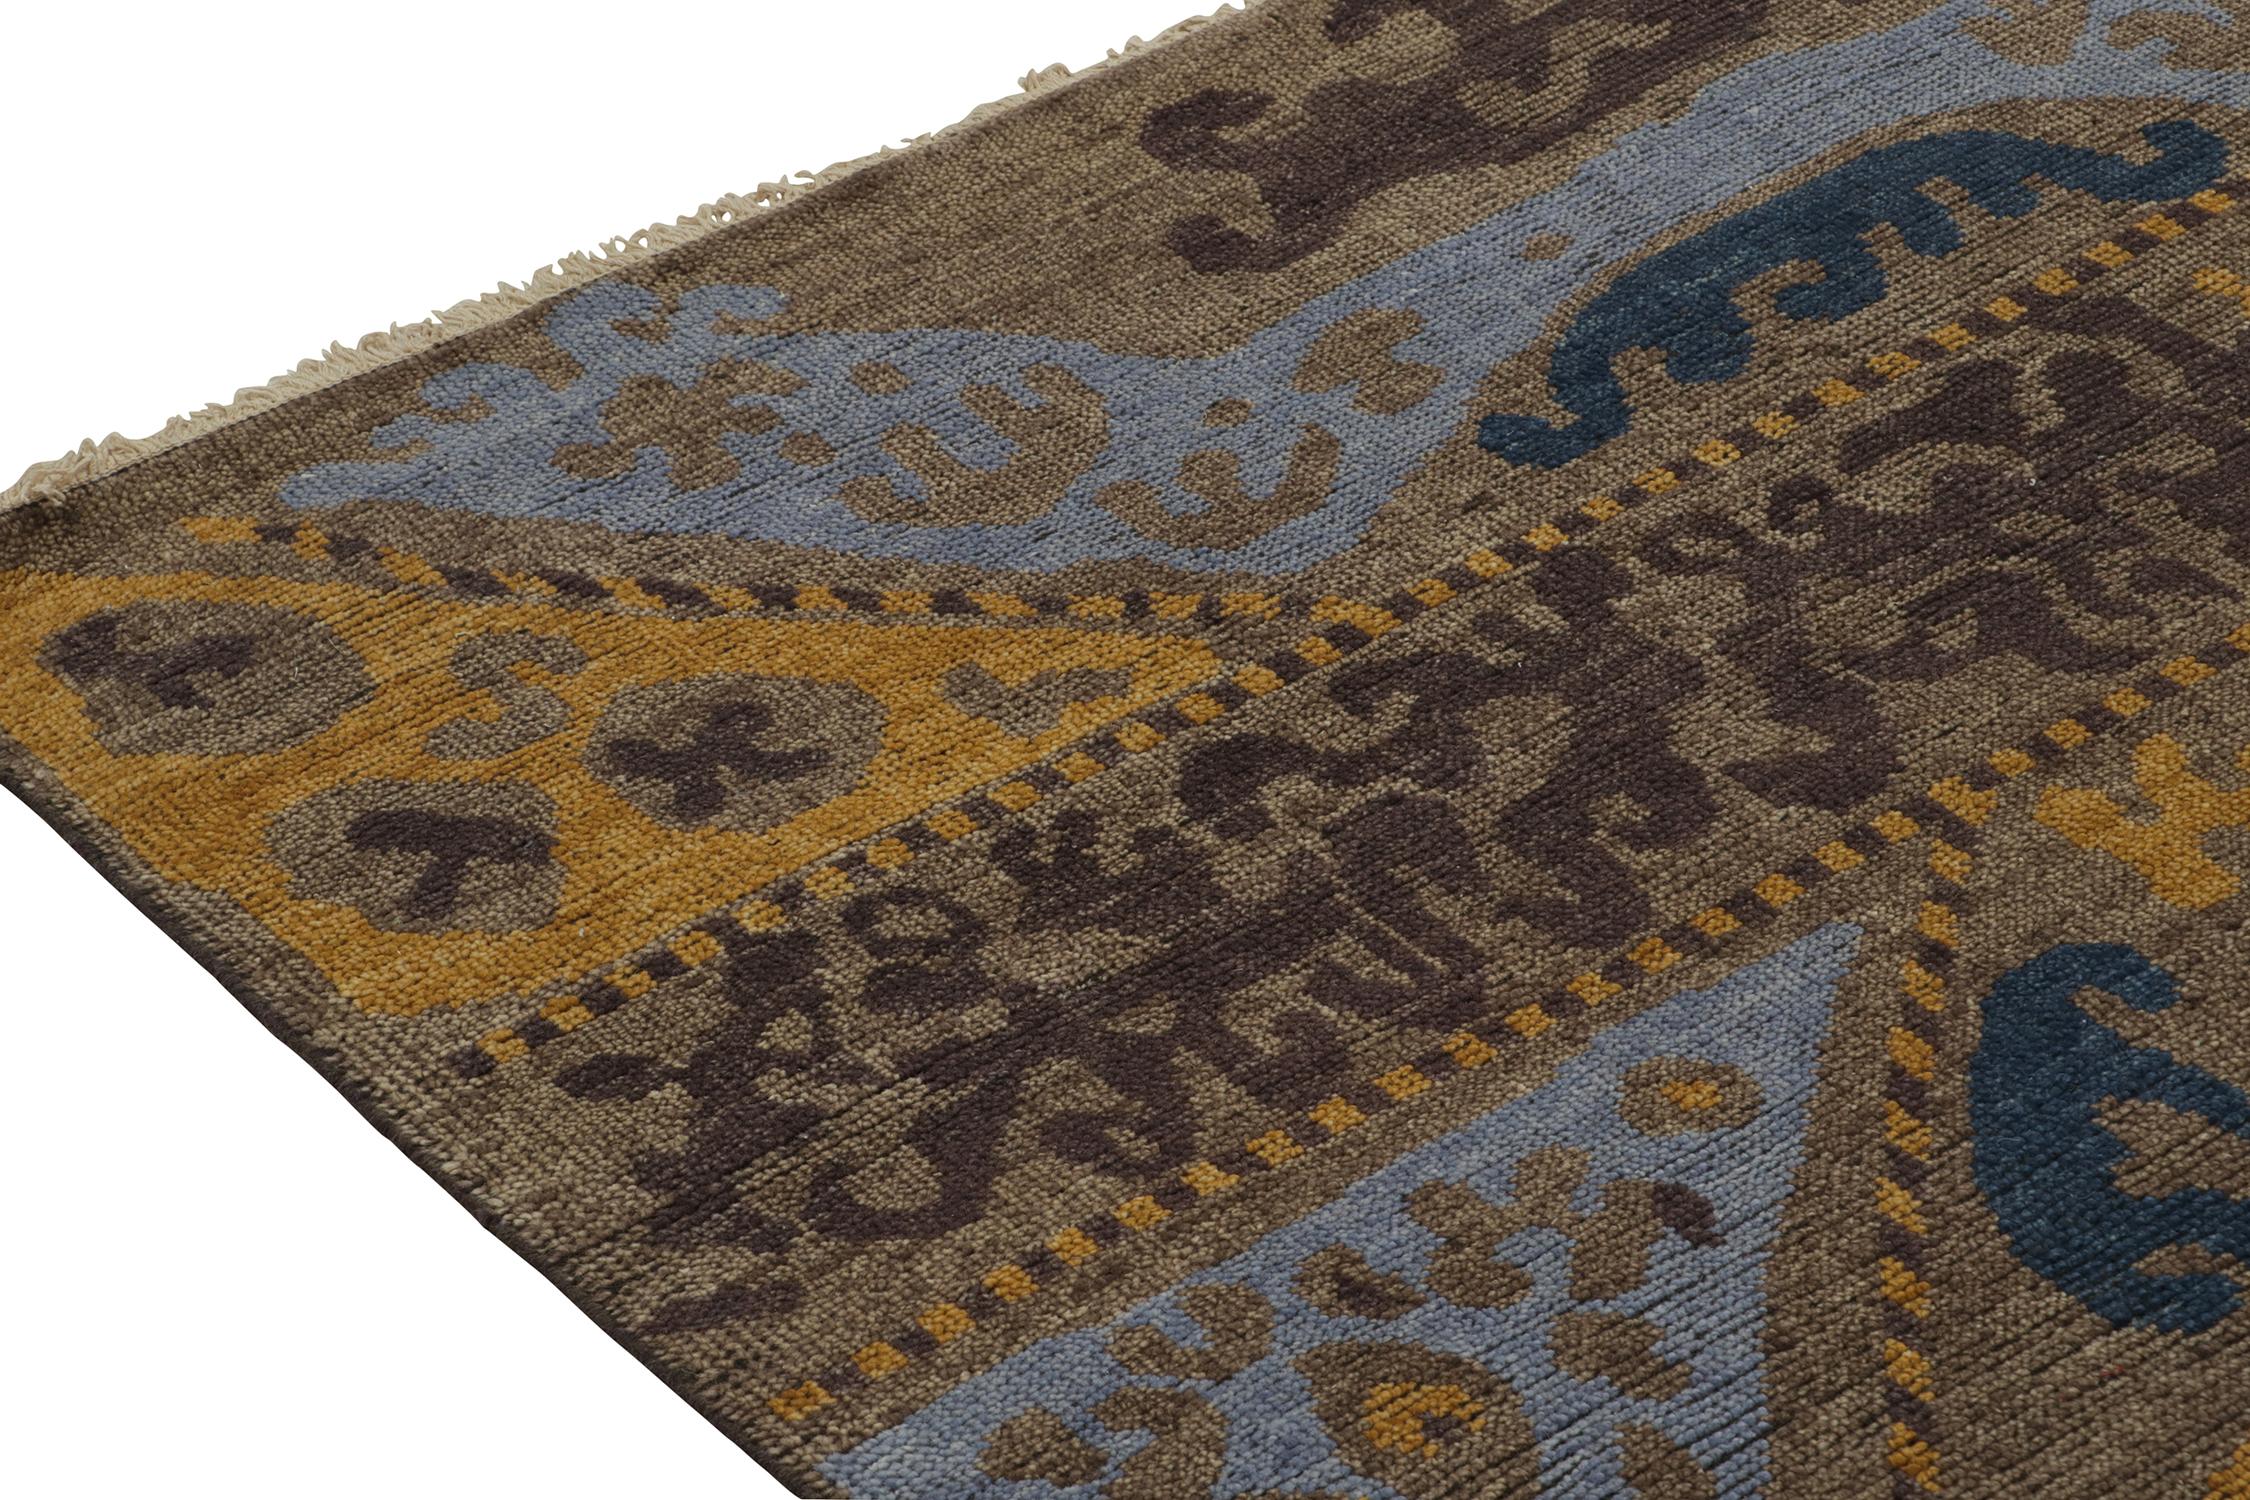 Rug & Kilim’s Tribal Inspired Rug in Blue, Brown, Gold Geometric Patterns In New Condition For Sale In Long Island City, NY